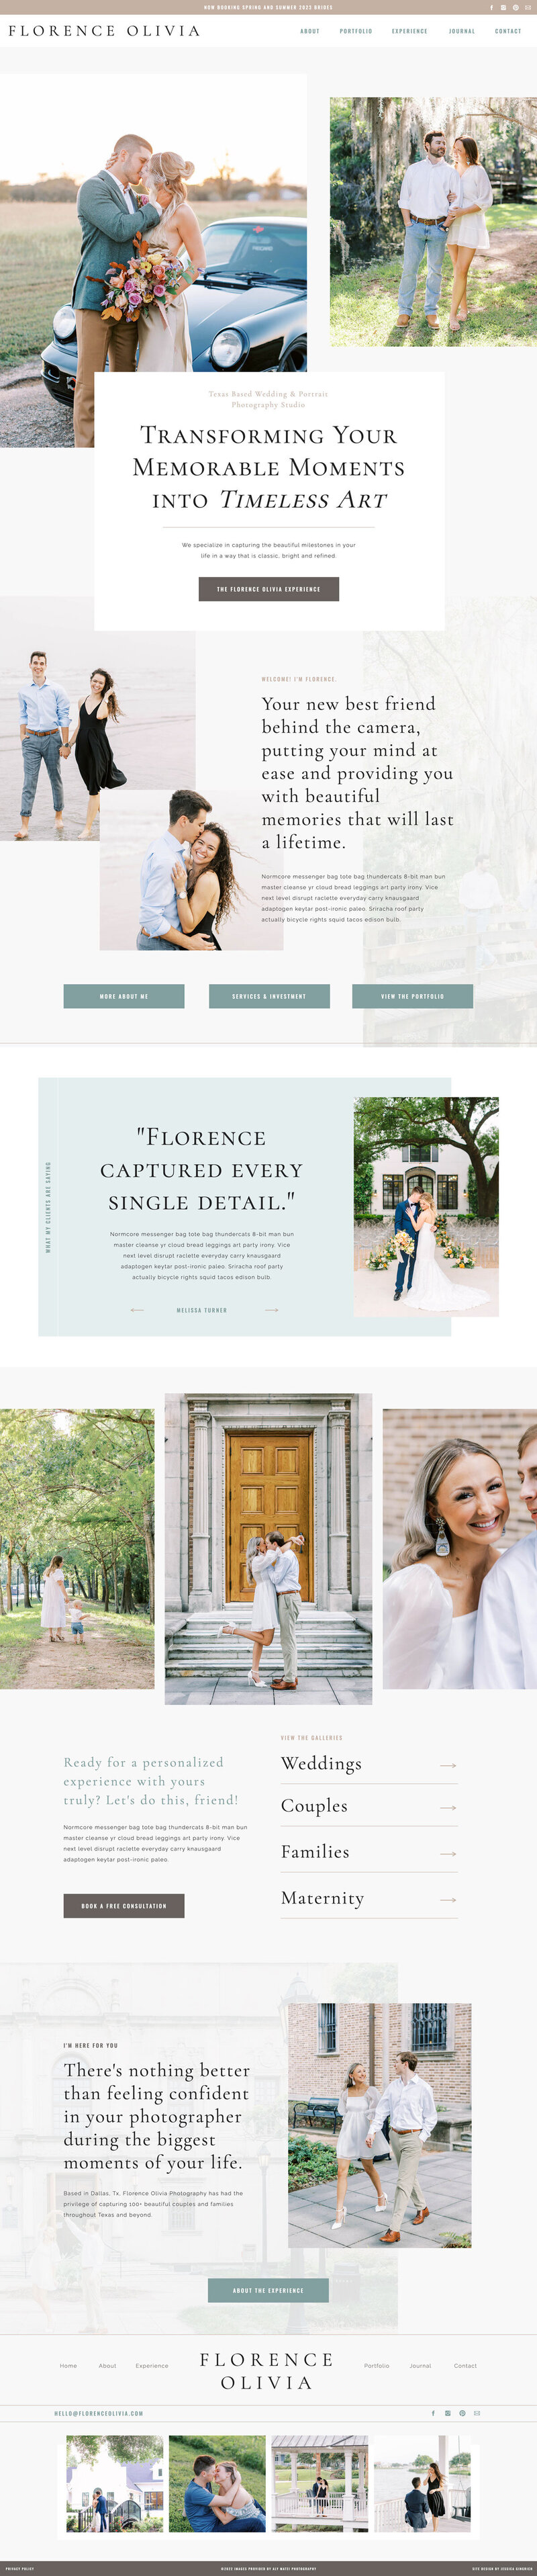 showit-template-florence-olivia